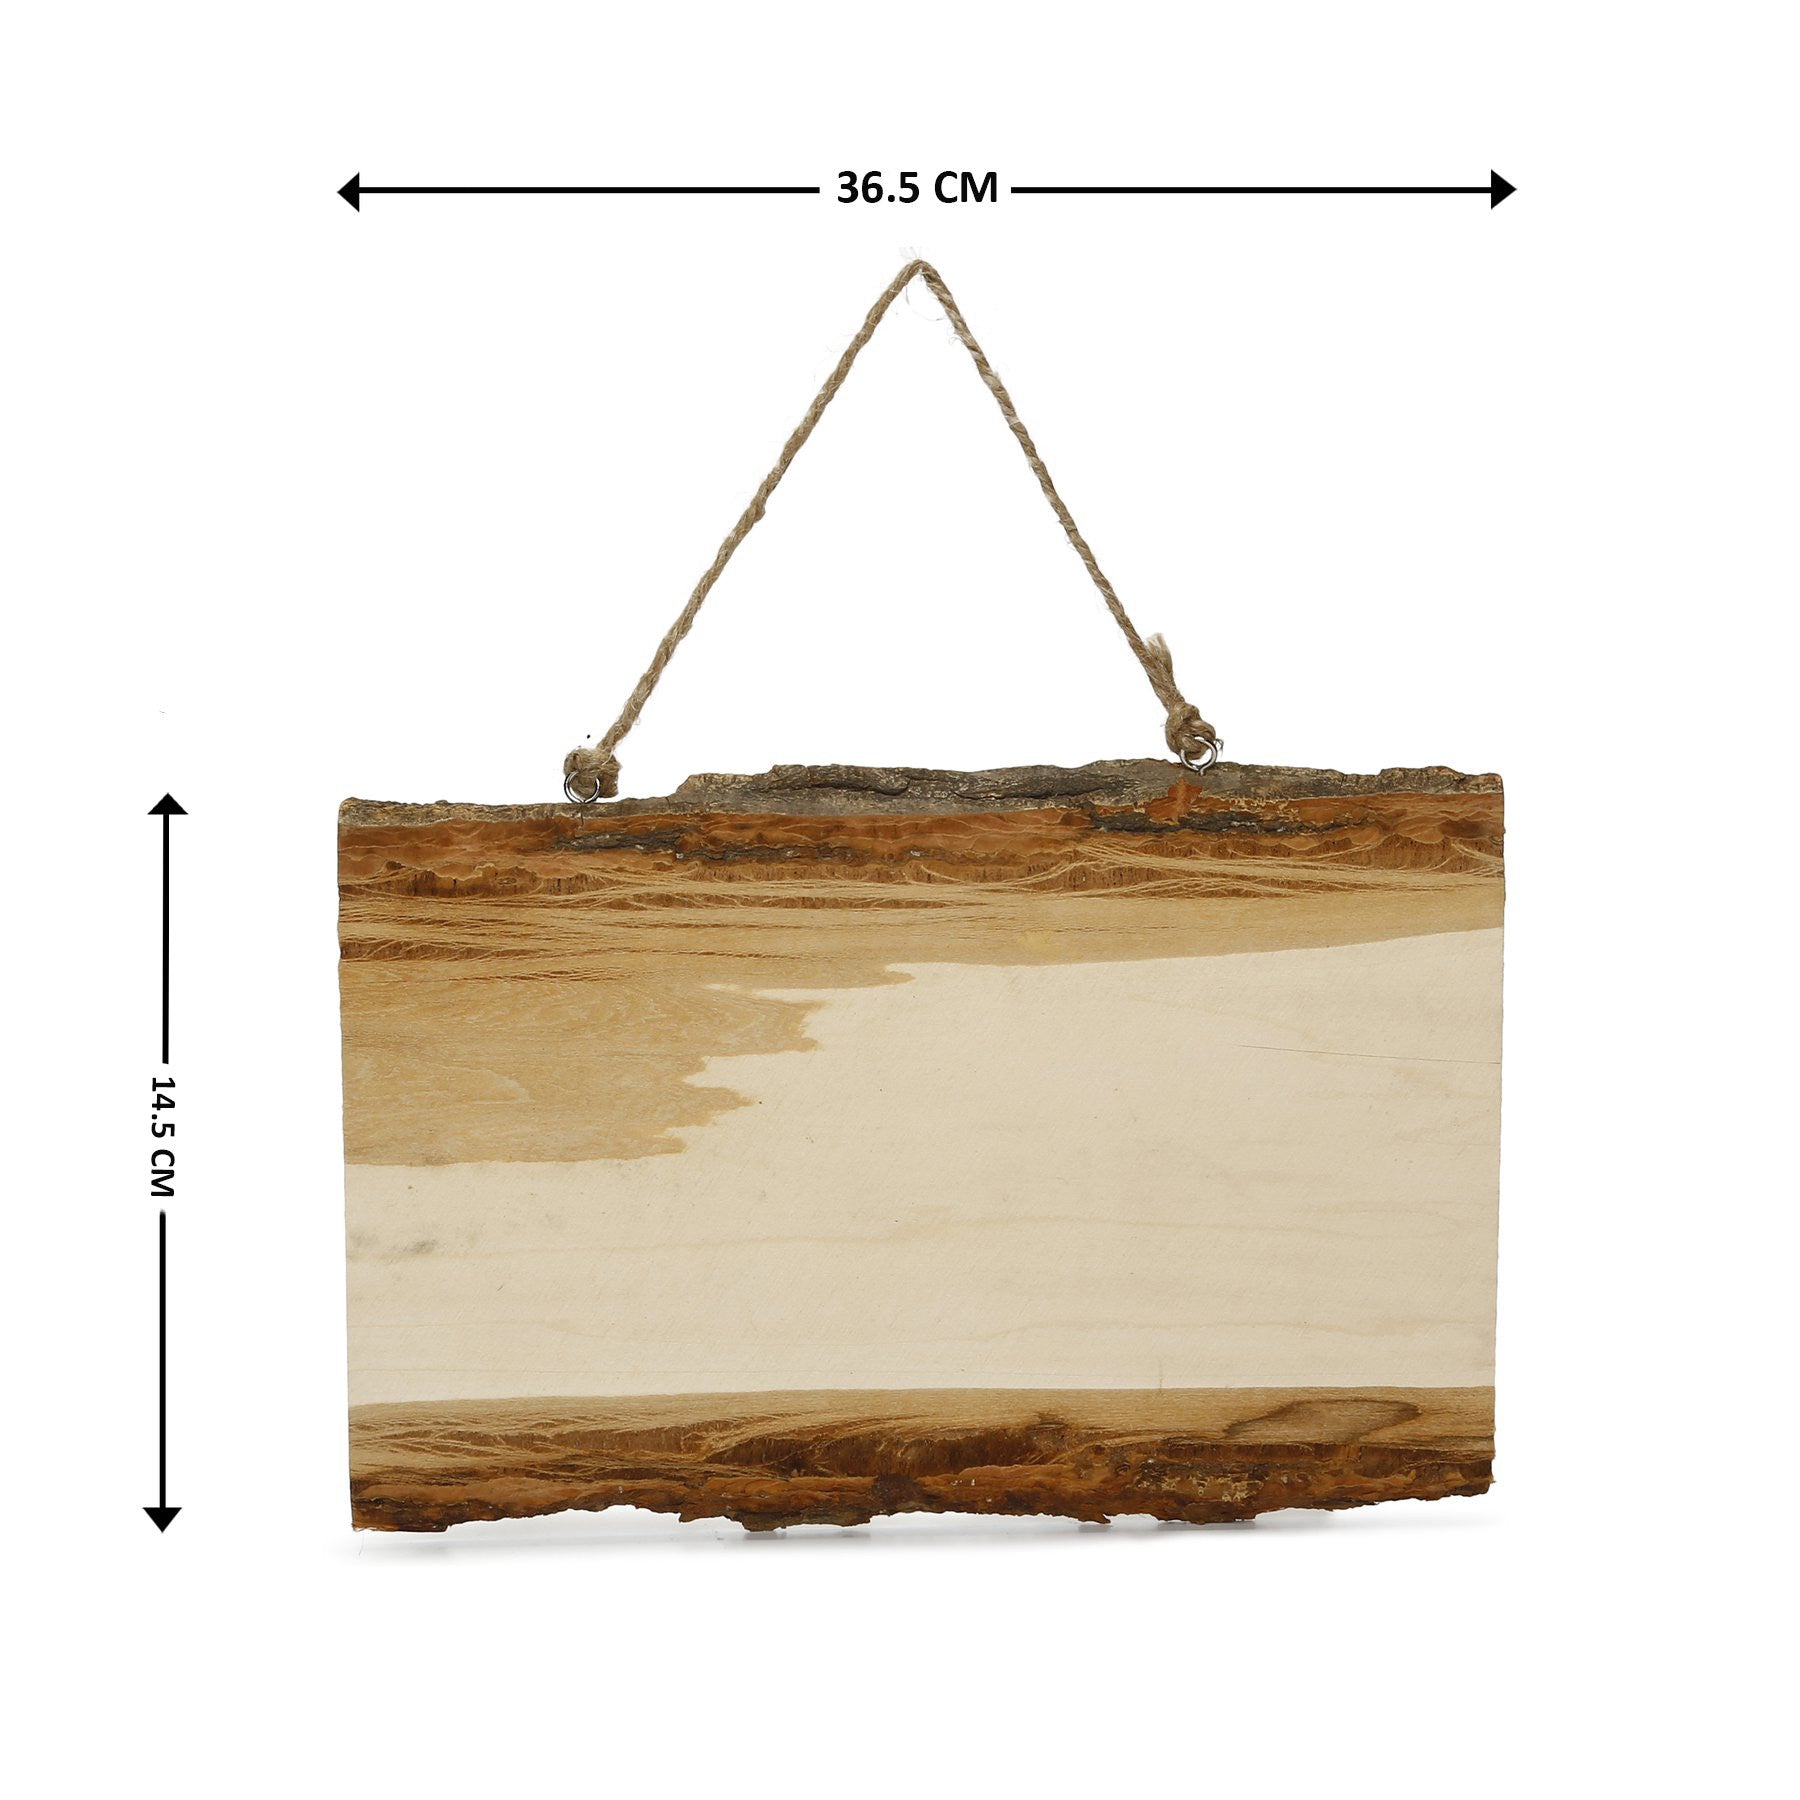 Wooden Natural Bark Rectangle W/Rope Approx L12 X W36Cm 1Pc Ib